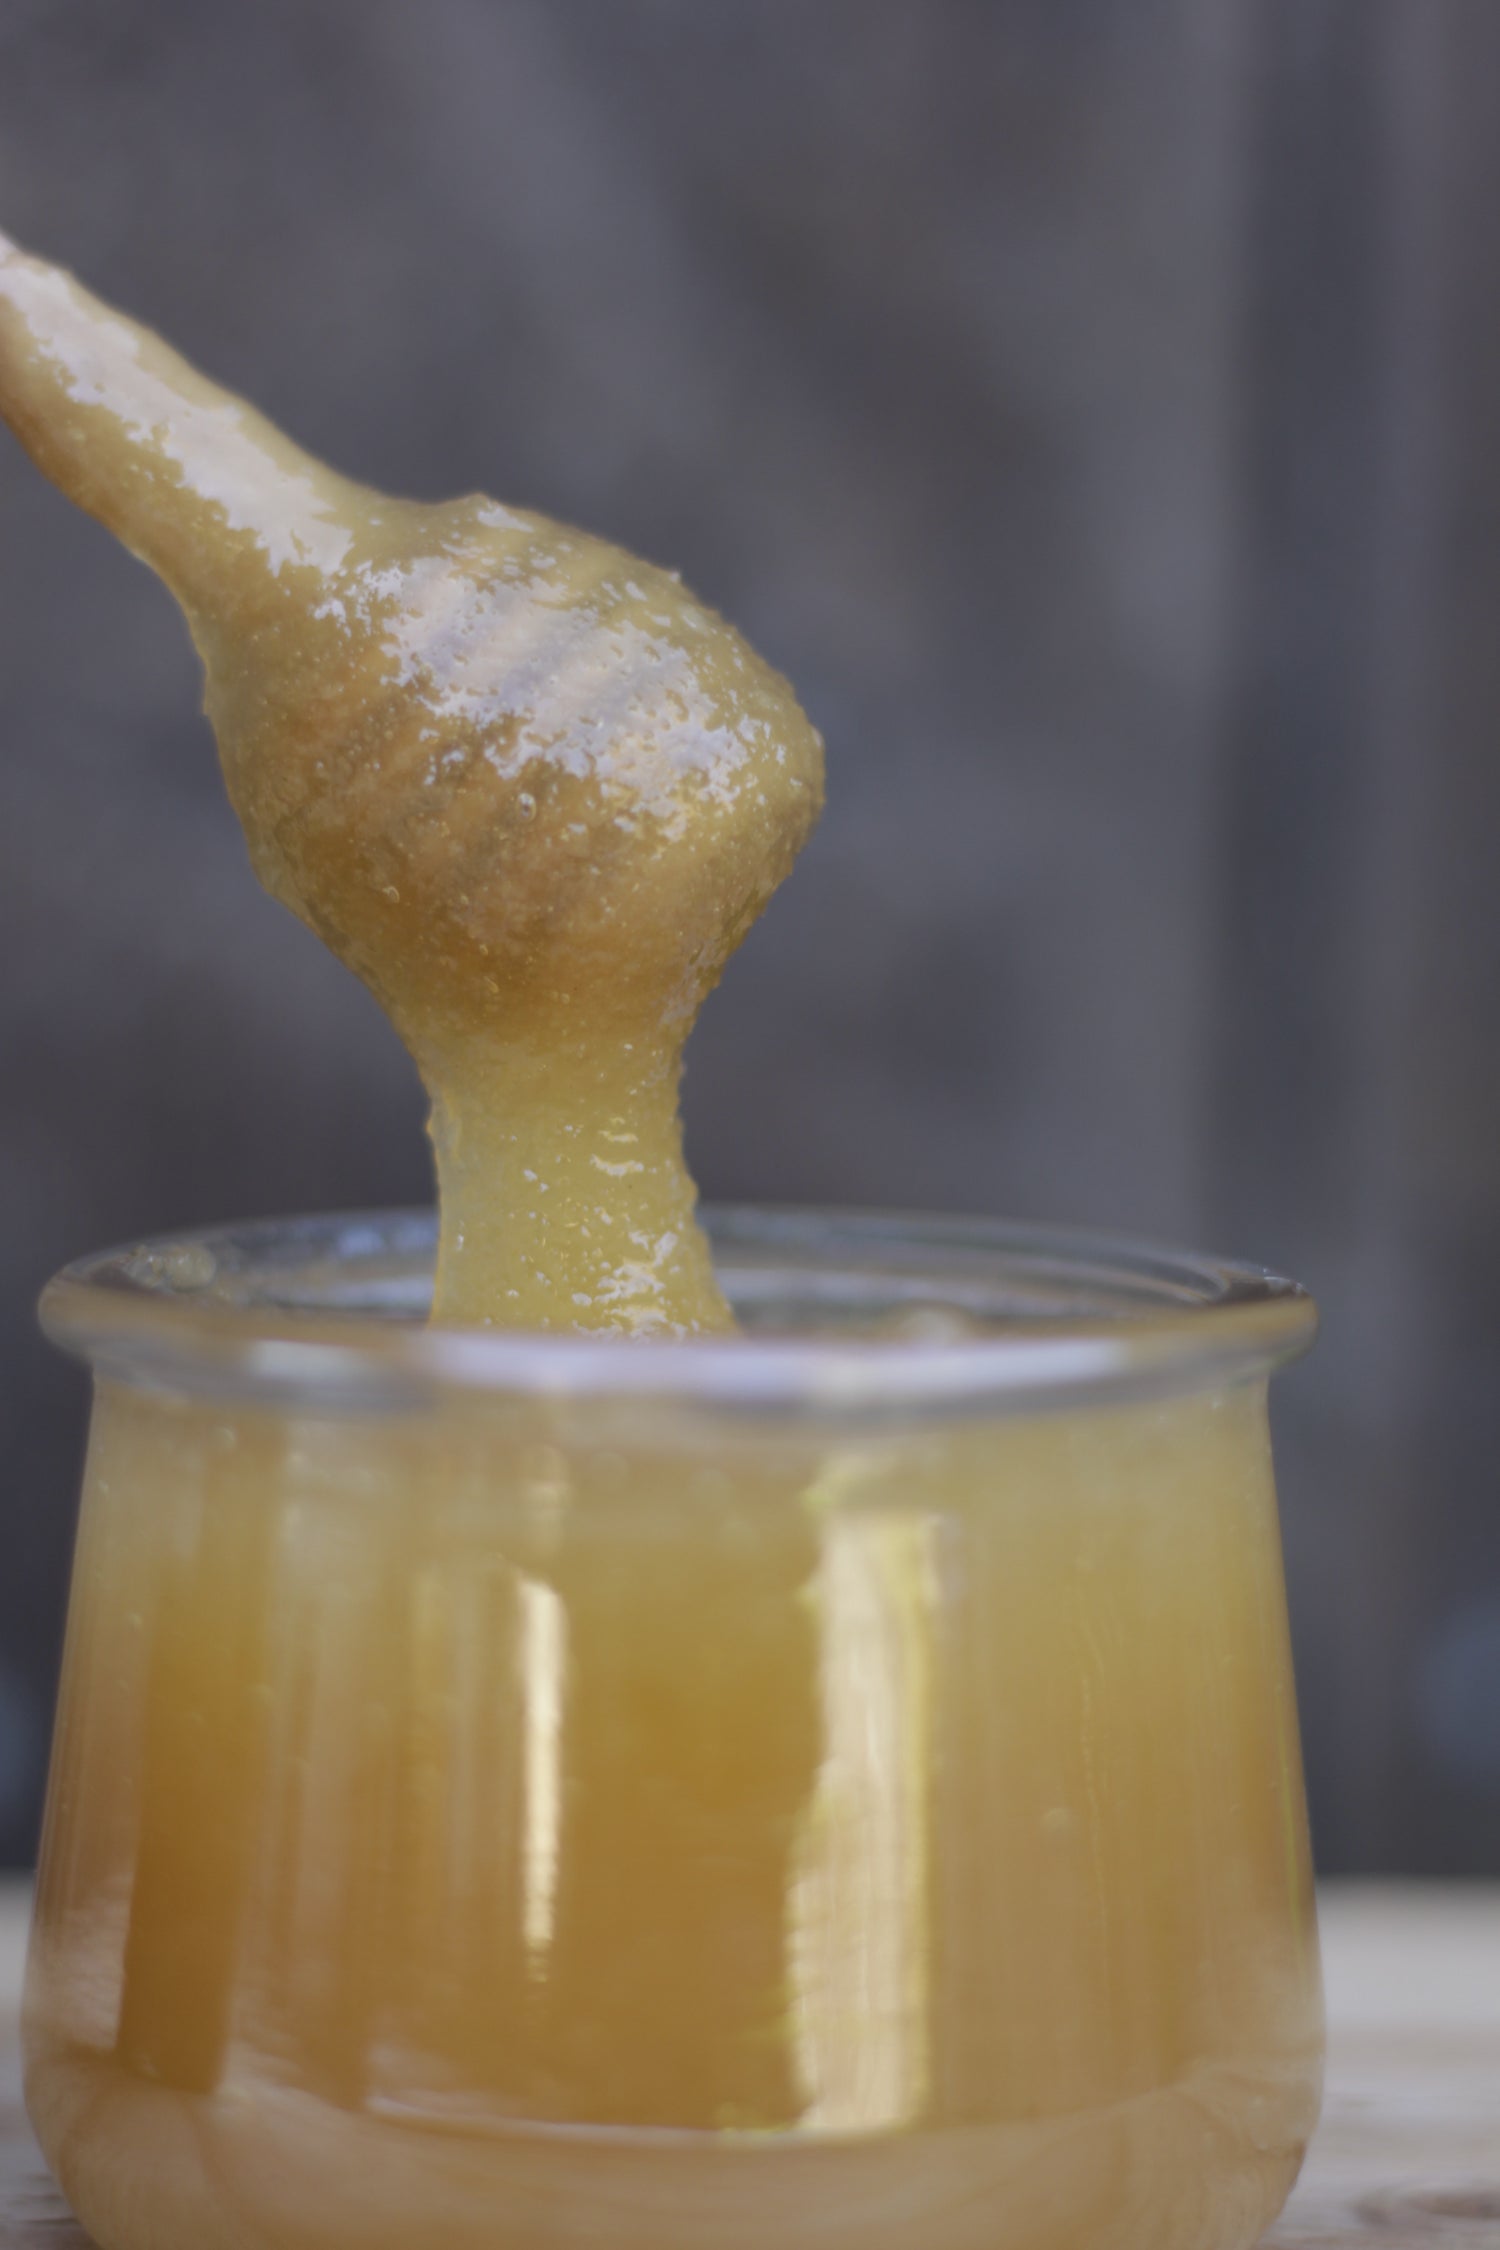 The process of packing honey.